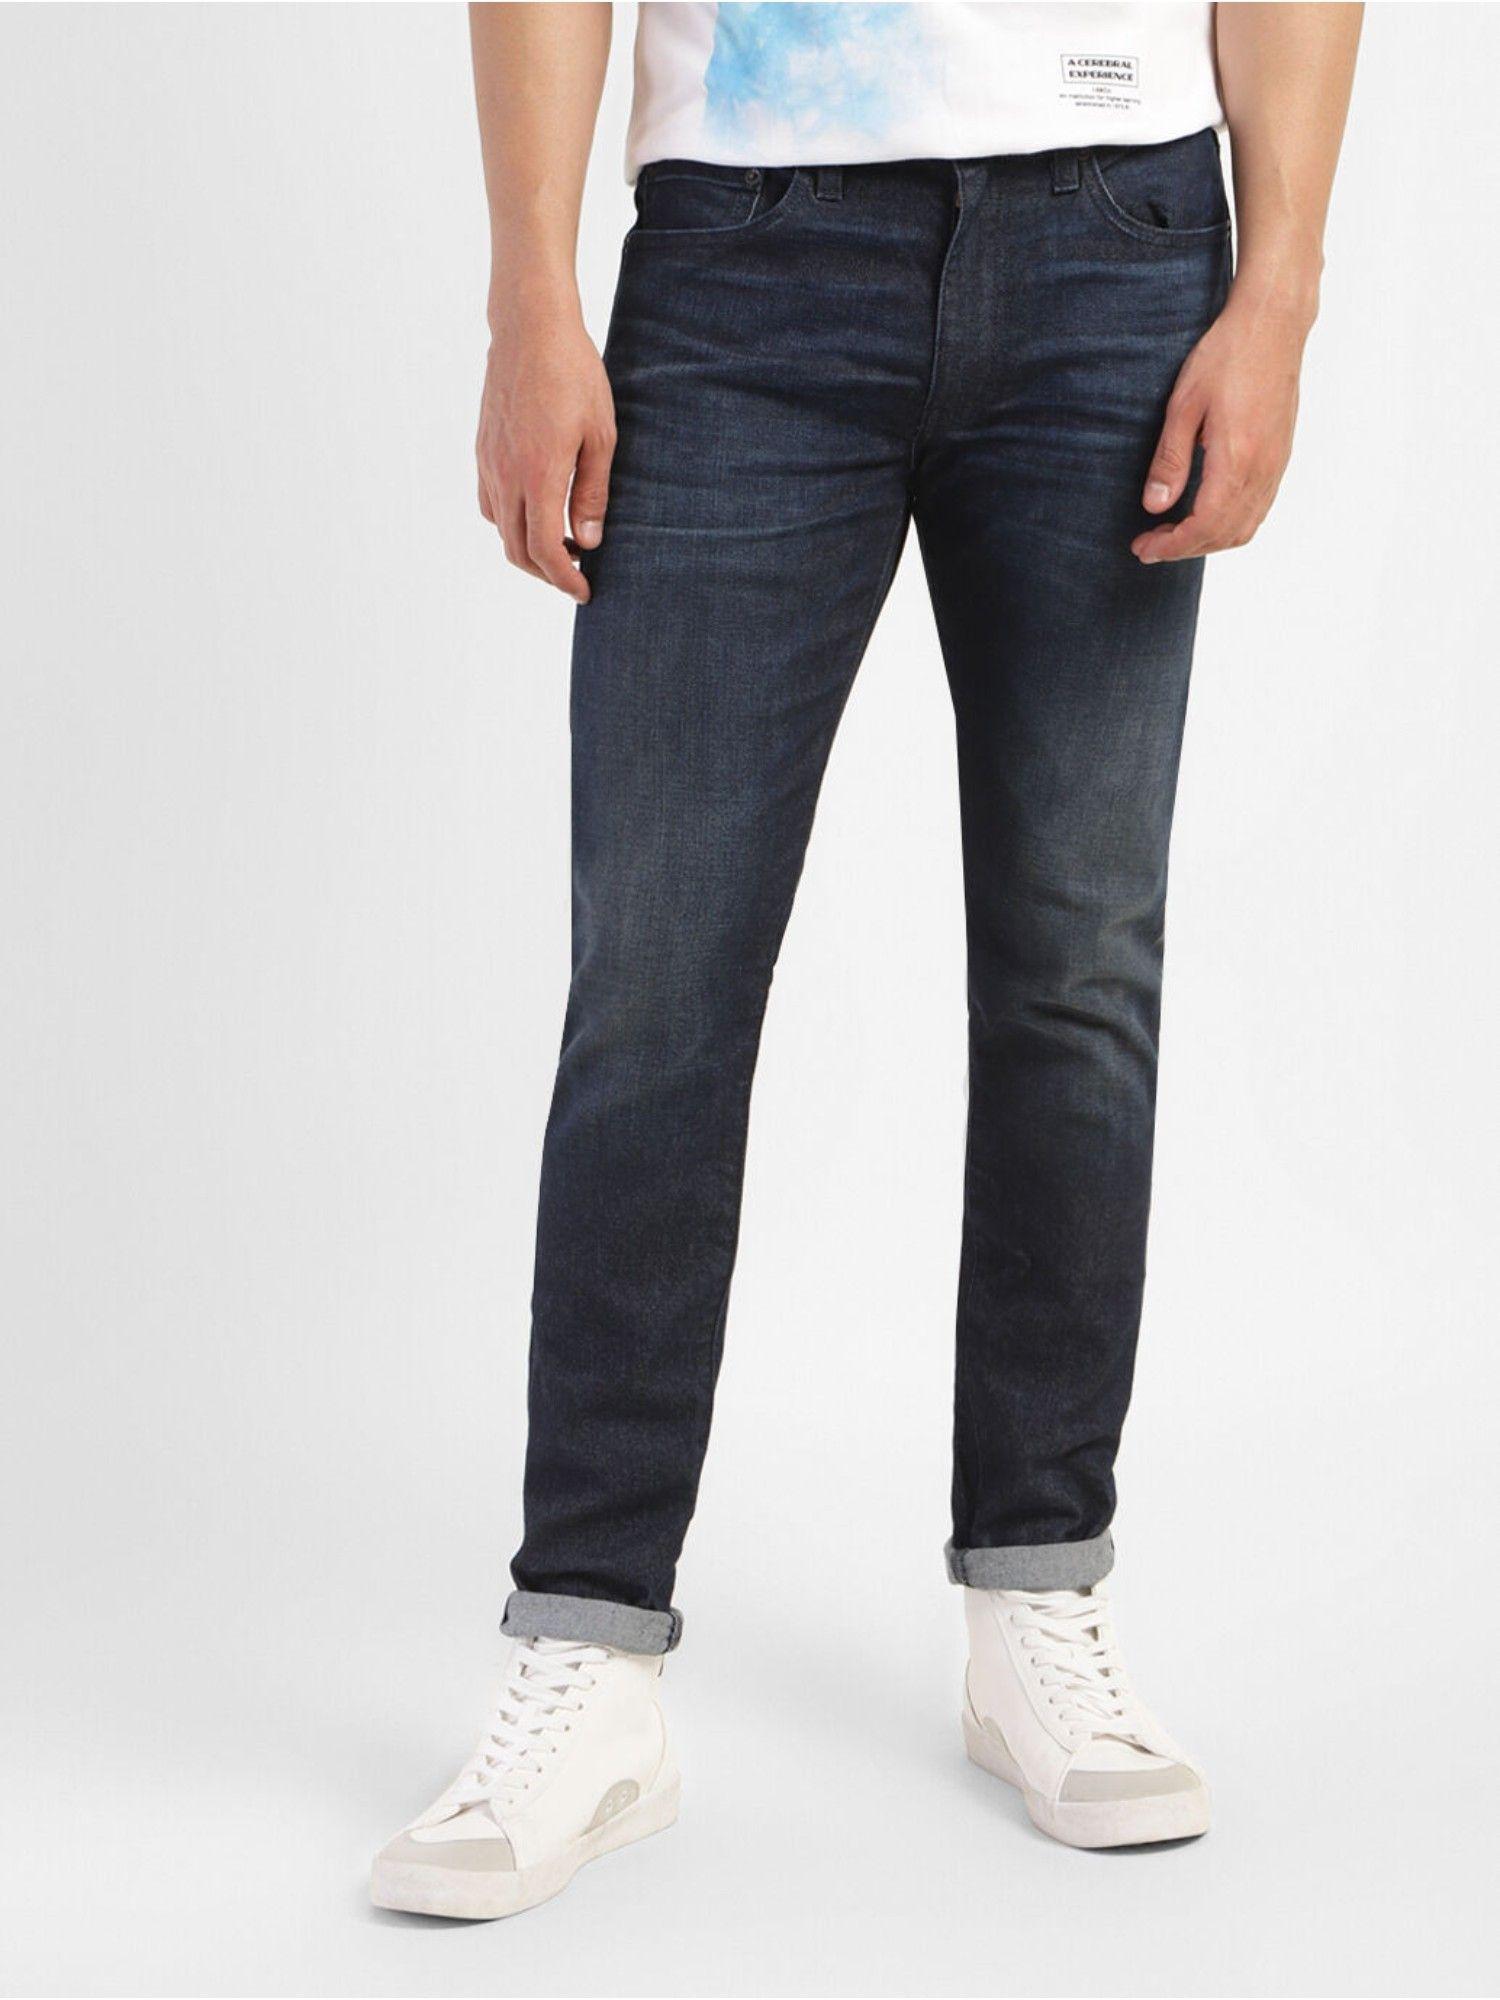 mens 512 navy slim tapered fit jeans